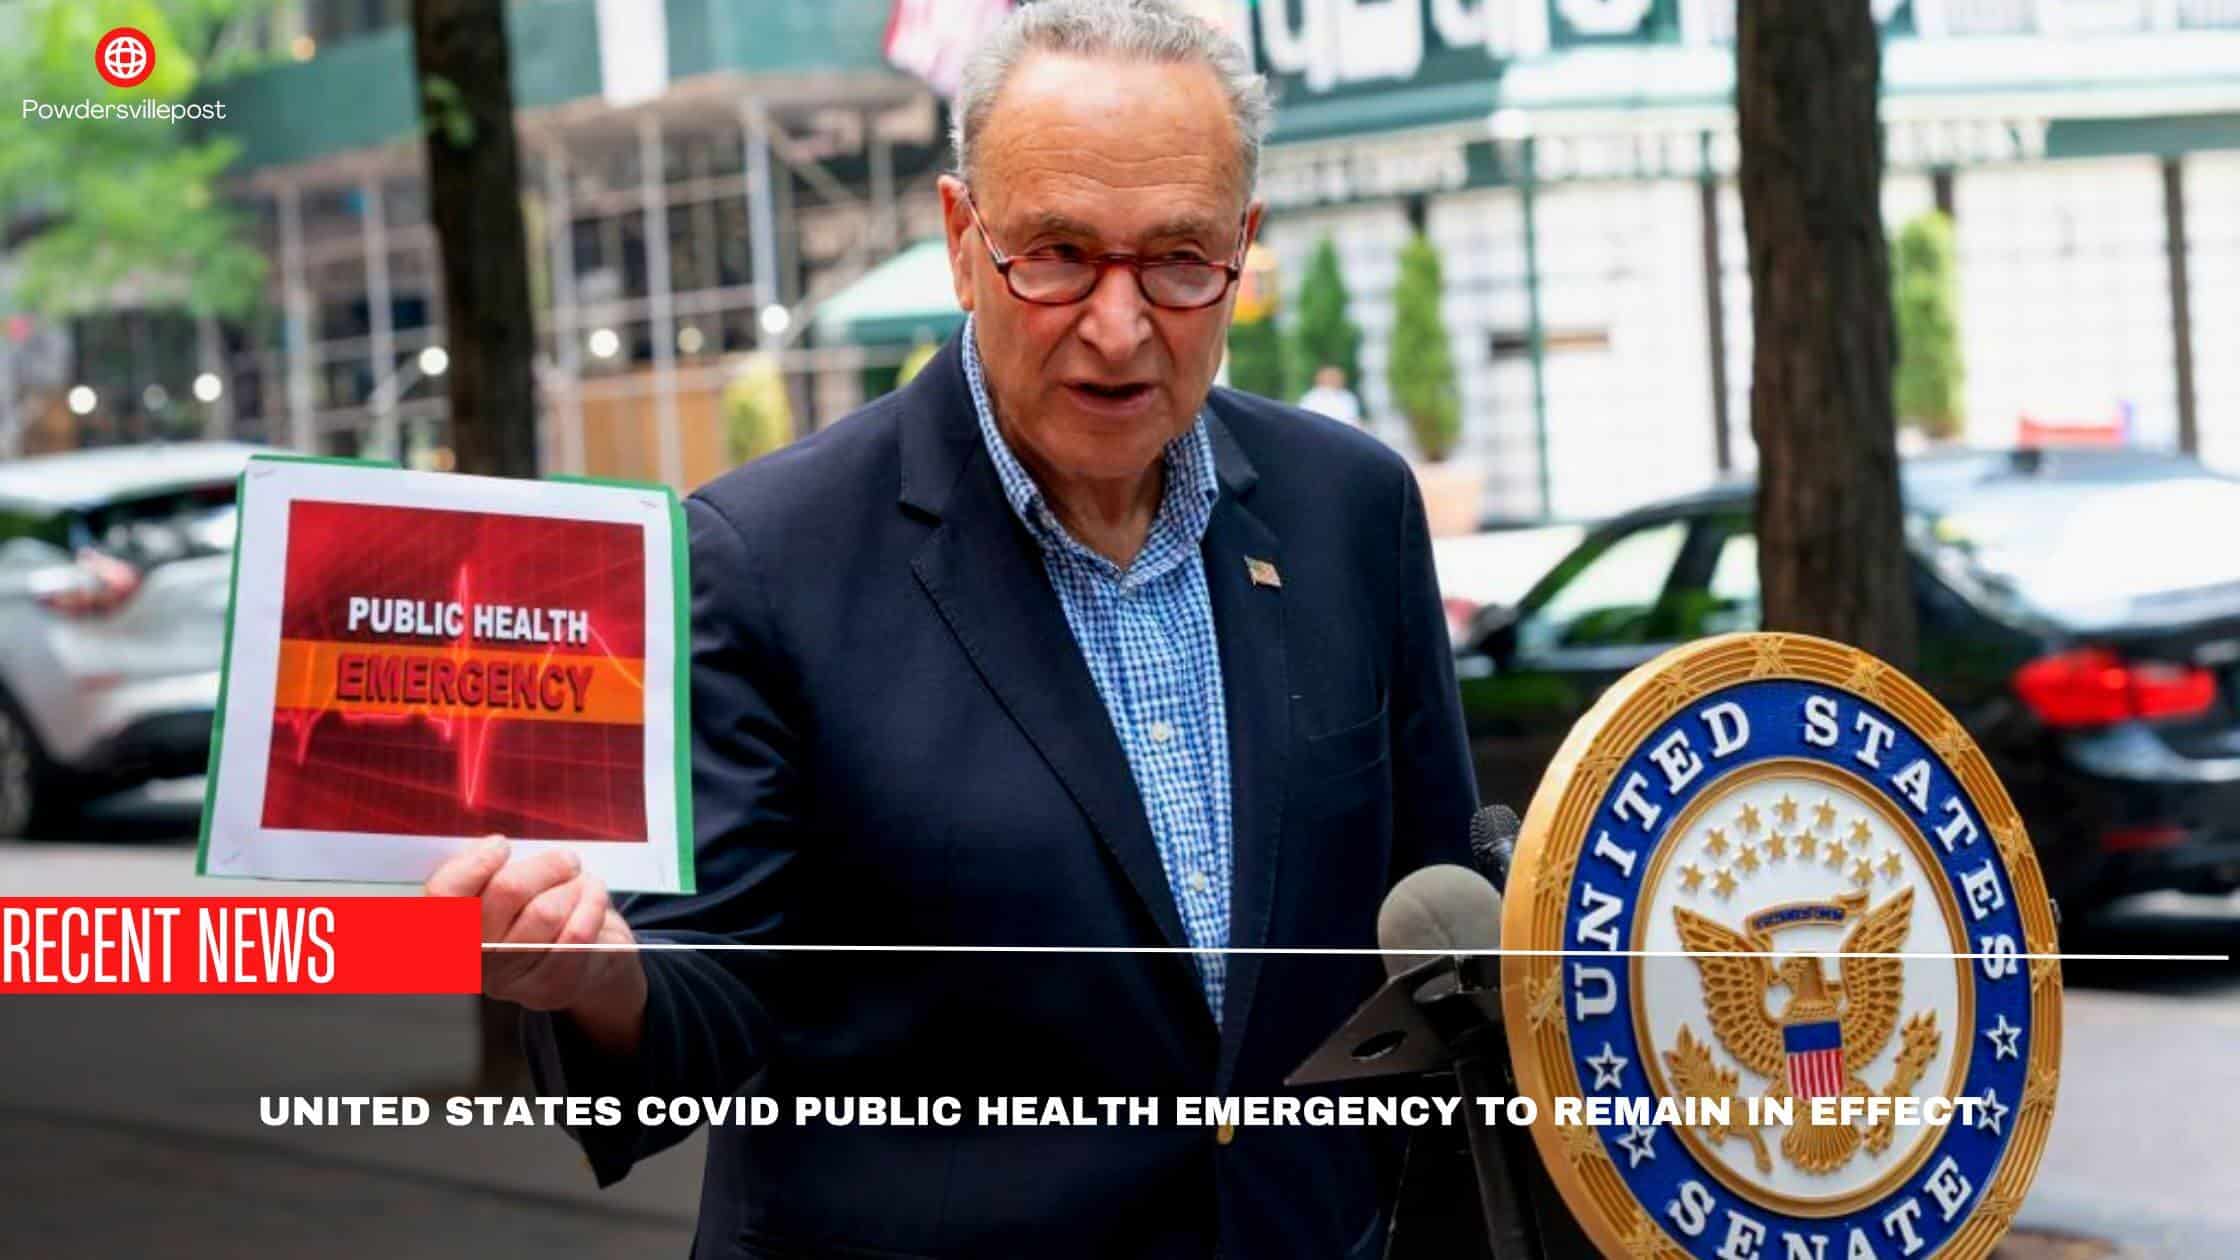 United States COVID Public Health Emergency To Remain In Effect